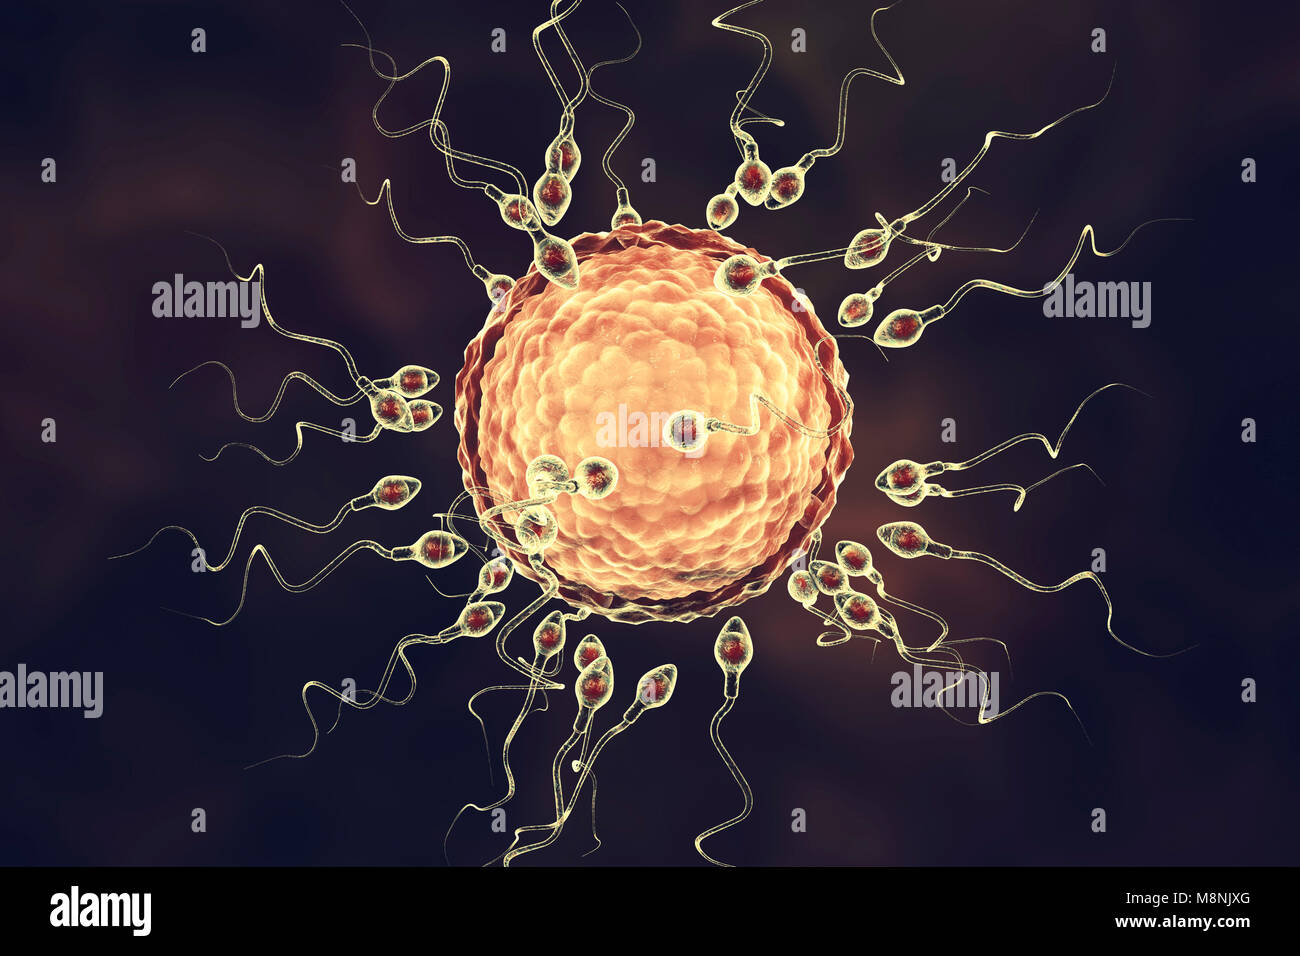 Human ovum, or egg, surrounded by numerous spermatozoa, computer illustration. In fertilisation, only a single sperm may successfully penetrate the ovum to fuse with the female nucleus. Barriers to be overcome include layers of follicular cells surrounding the ovum (corona radiata) and an underlying glycoprotein membrane, the zona pellucida. The membrane is digested by enzymes released from the acrosome, a cap on the head of the sperm: subsequent rapid chemical changes in the zona pellucida prevent competing sperm from entering. Stock Photo